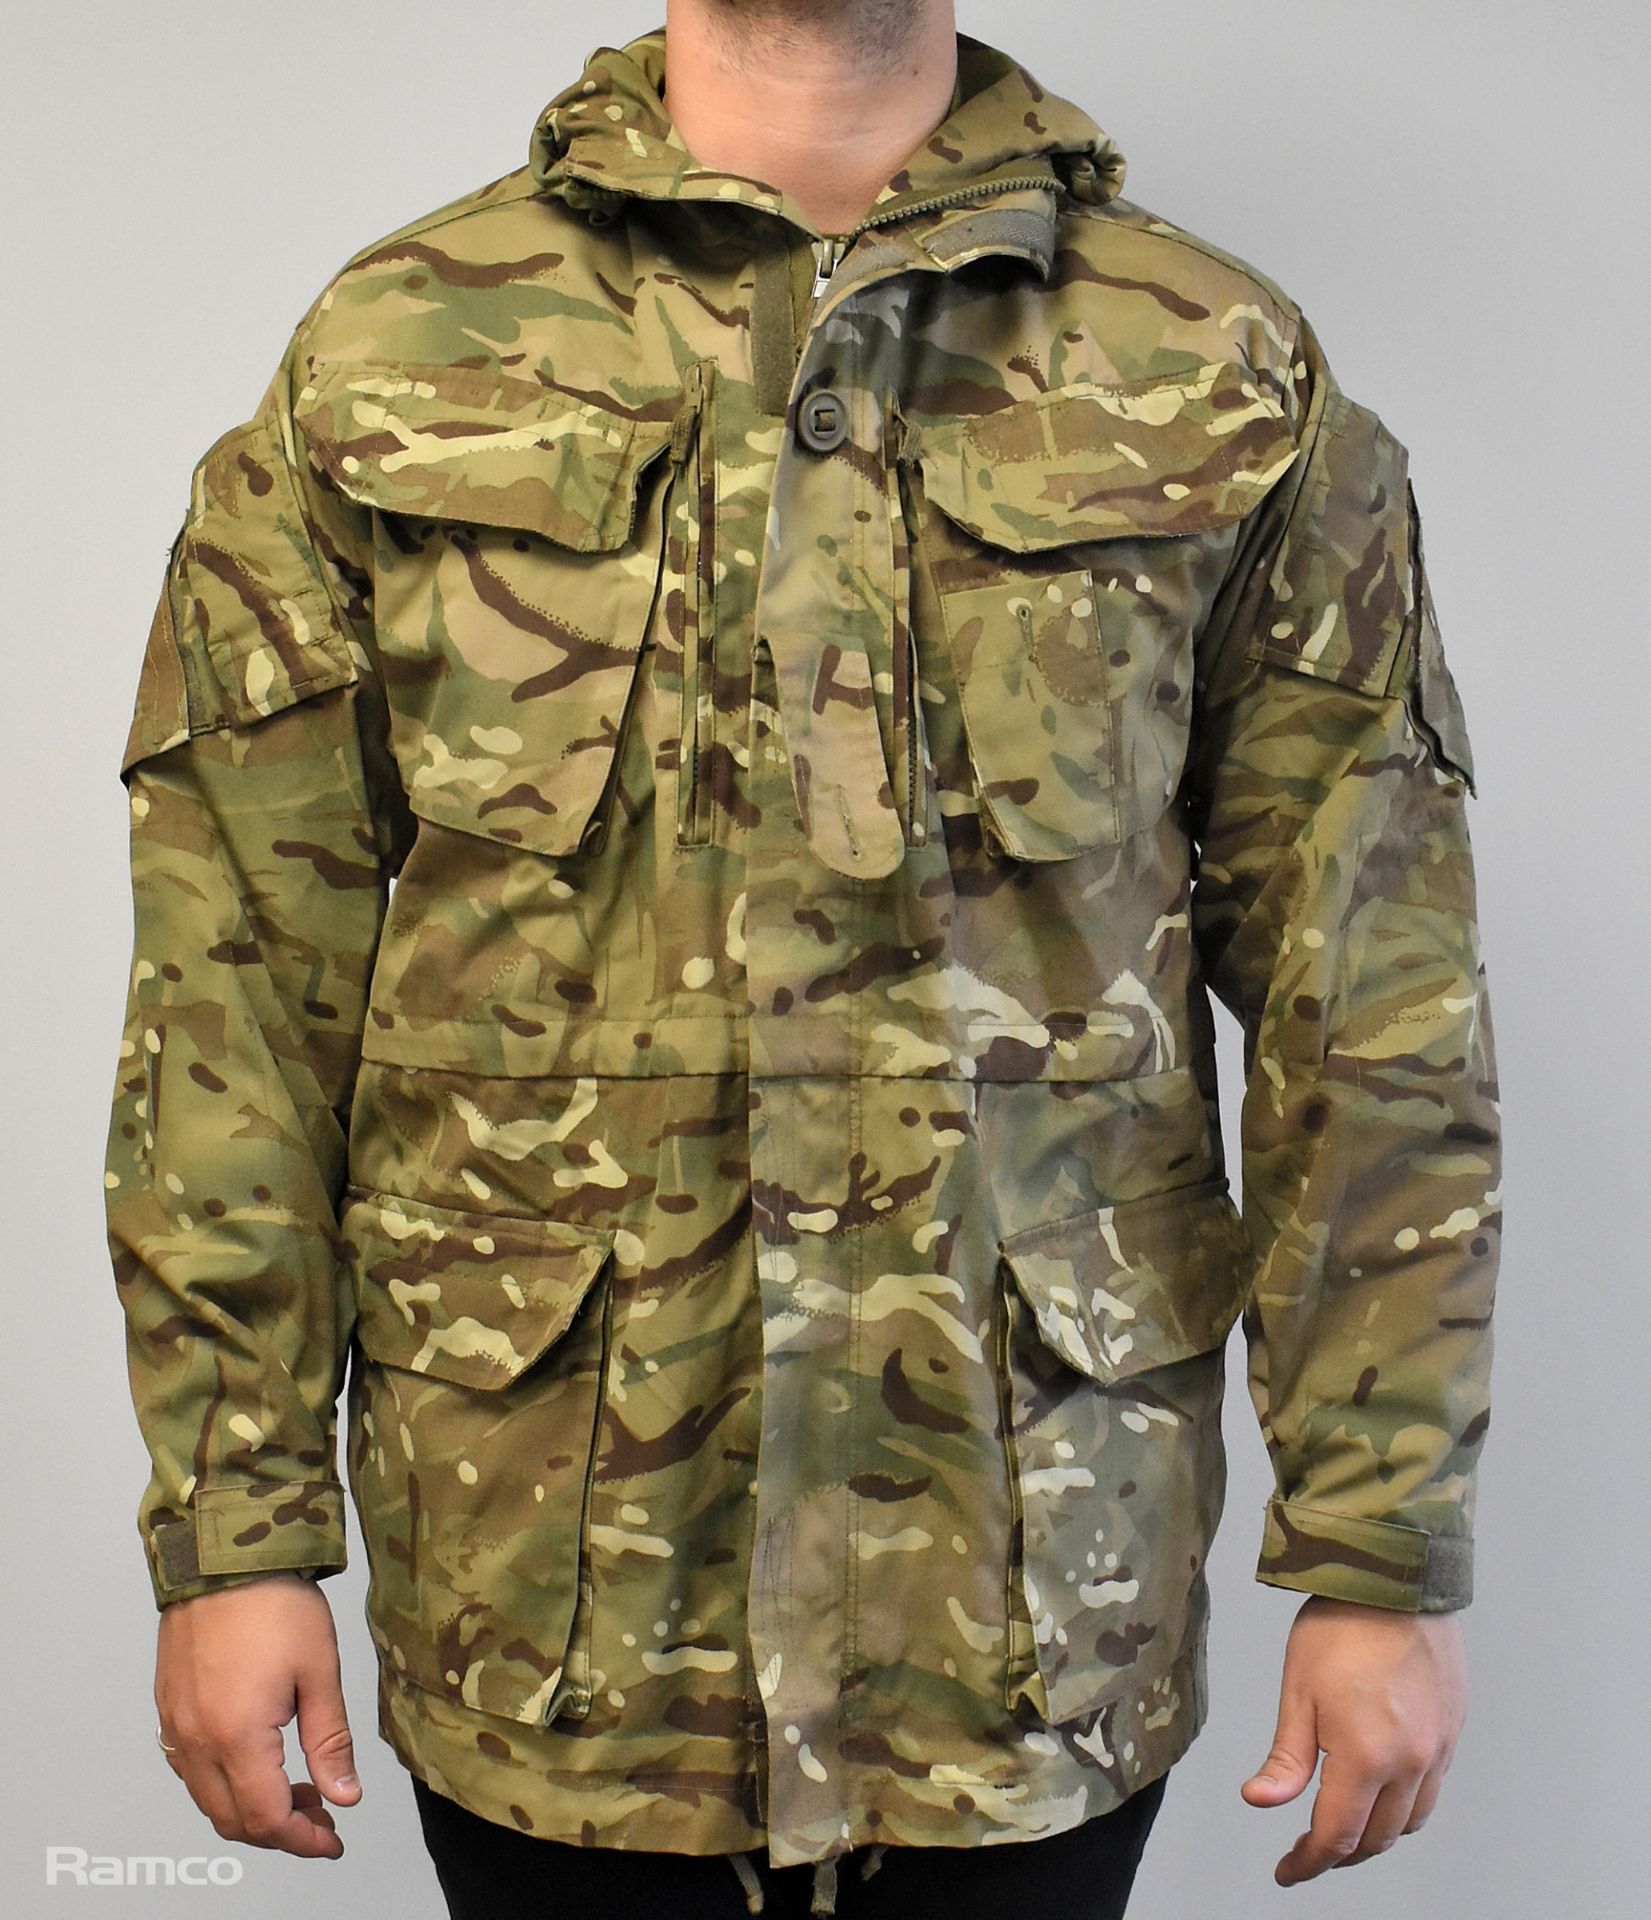 50x British Army MTP windproof smocks - mixed grades and sizes